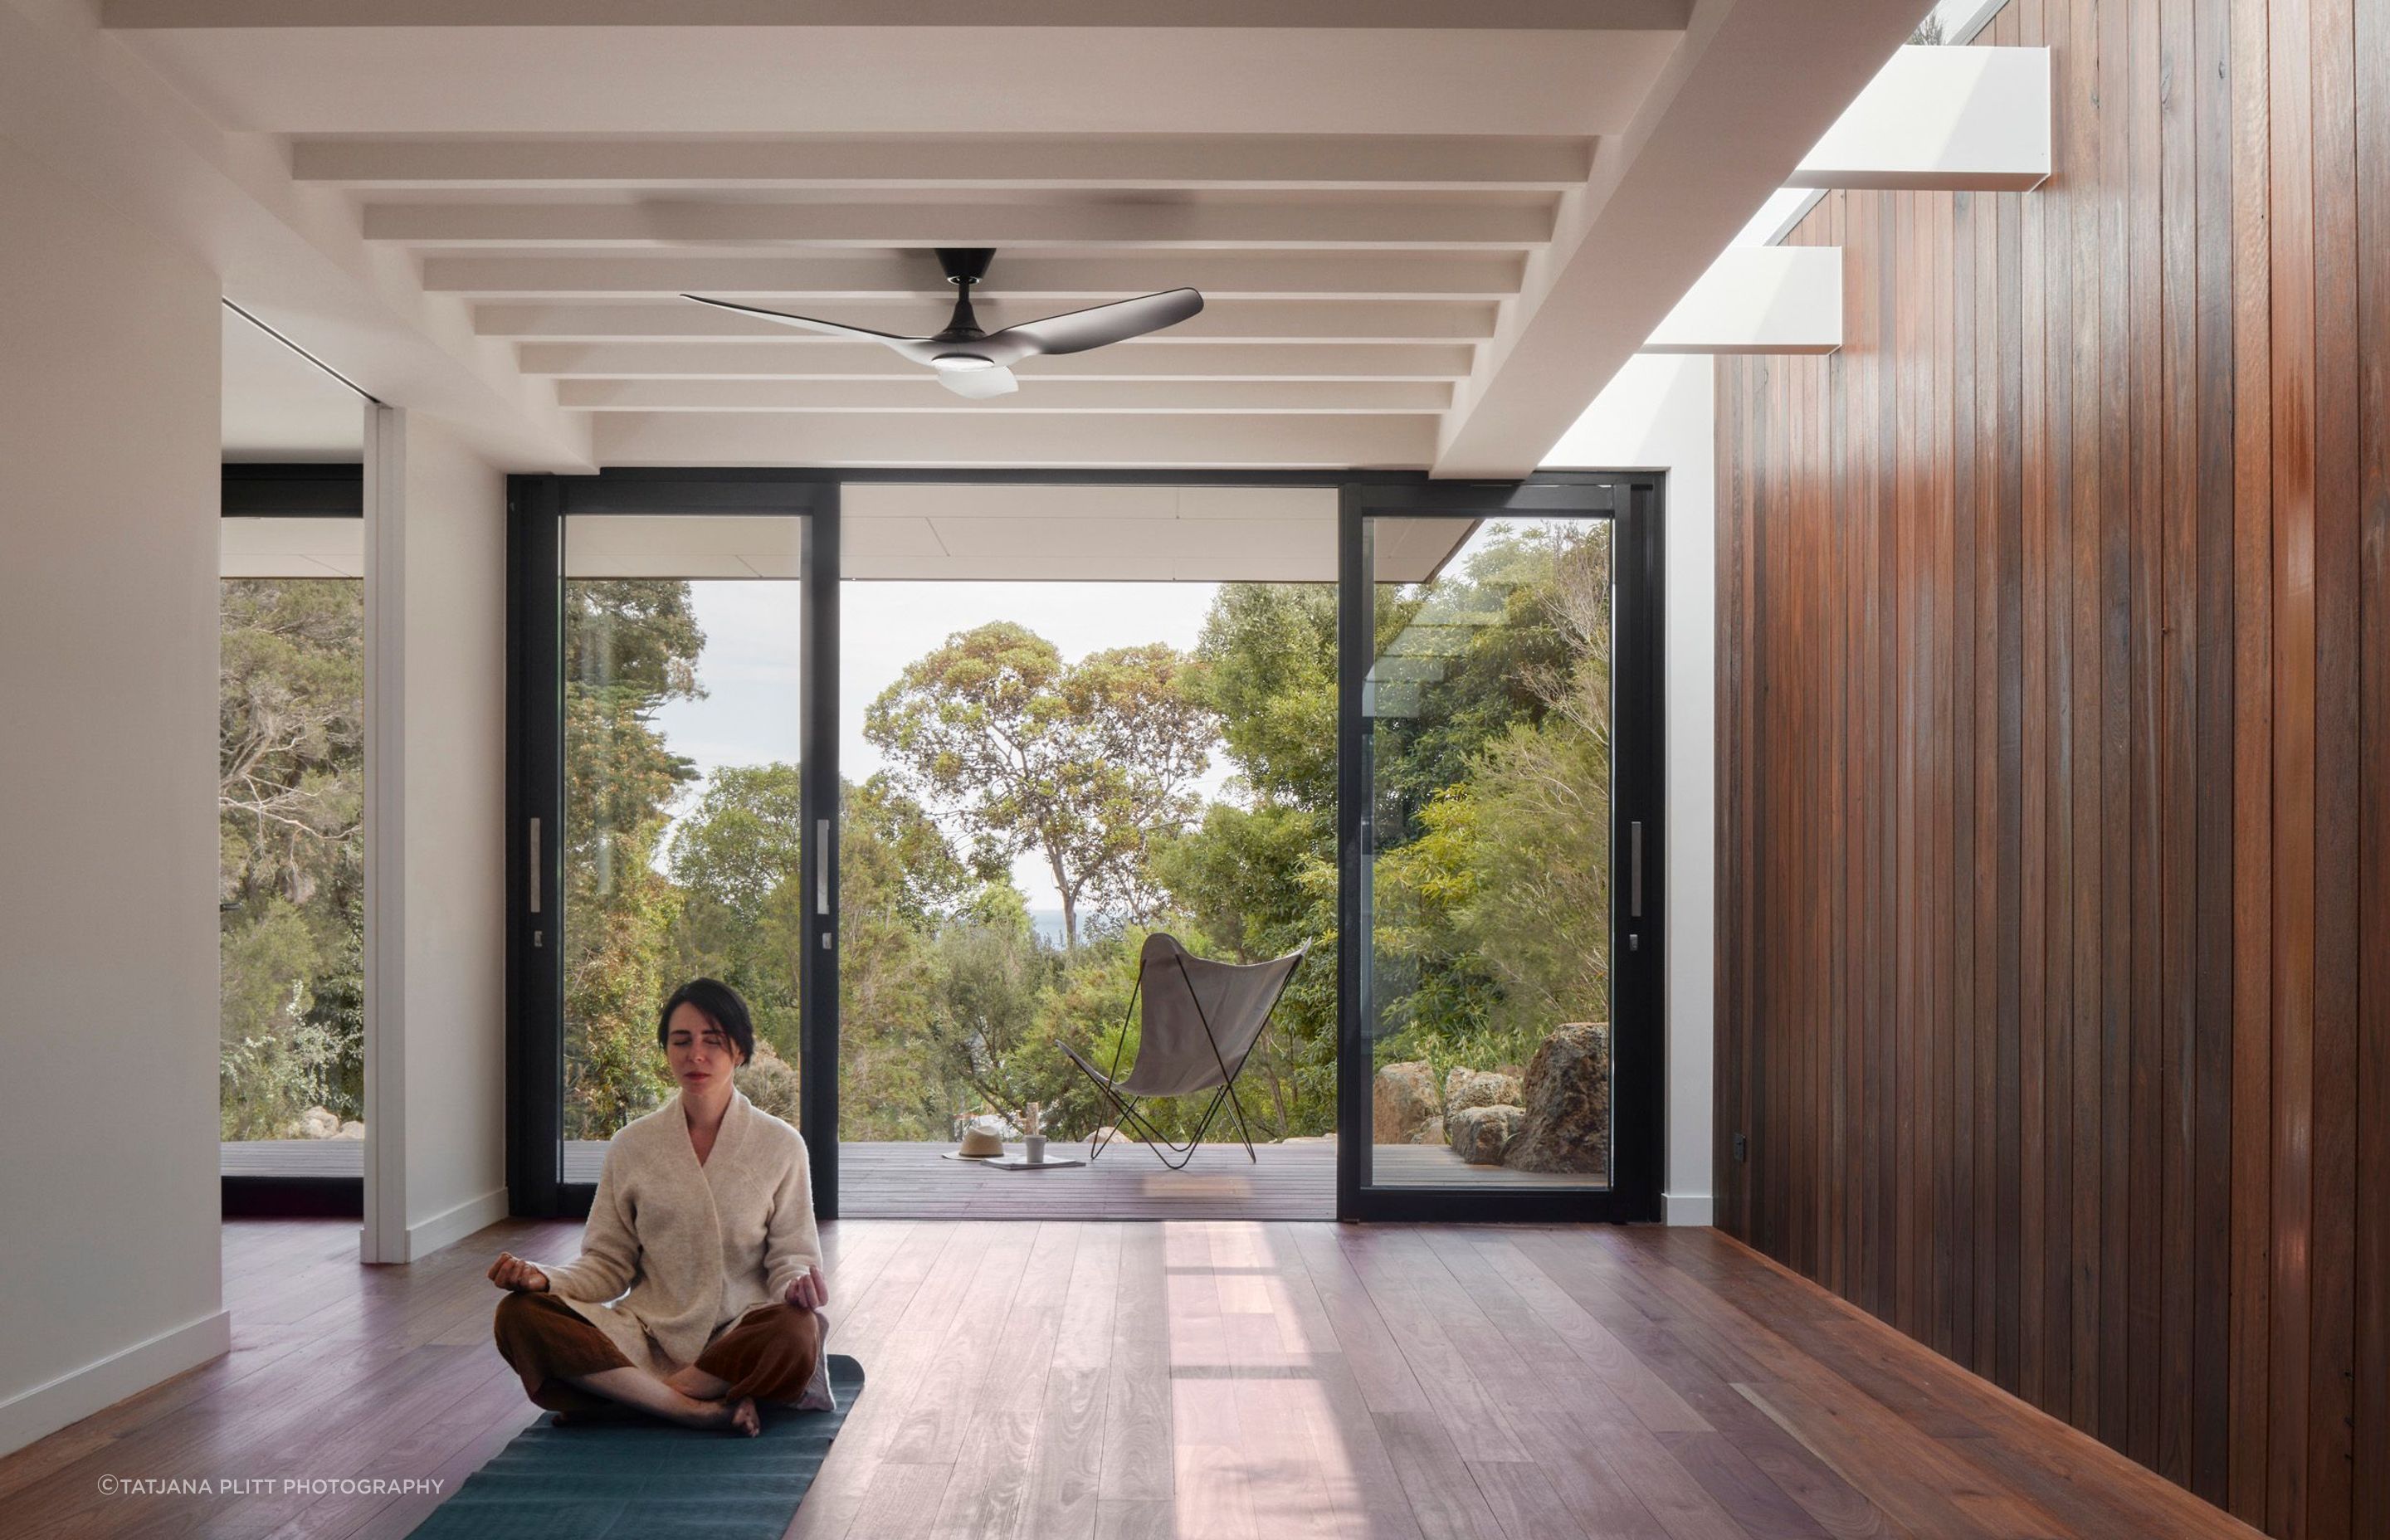 The downstairs room is for the owners and other Zen masters to meditate and teach.